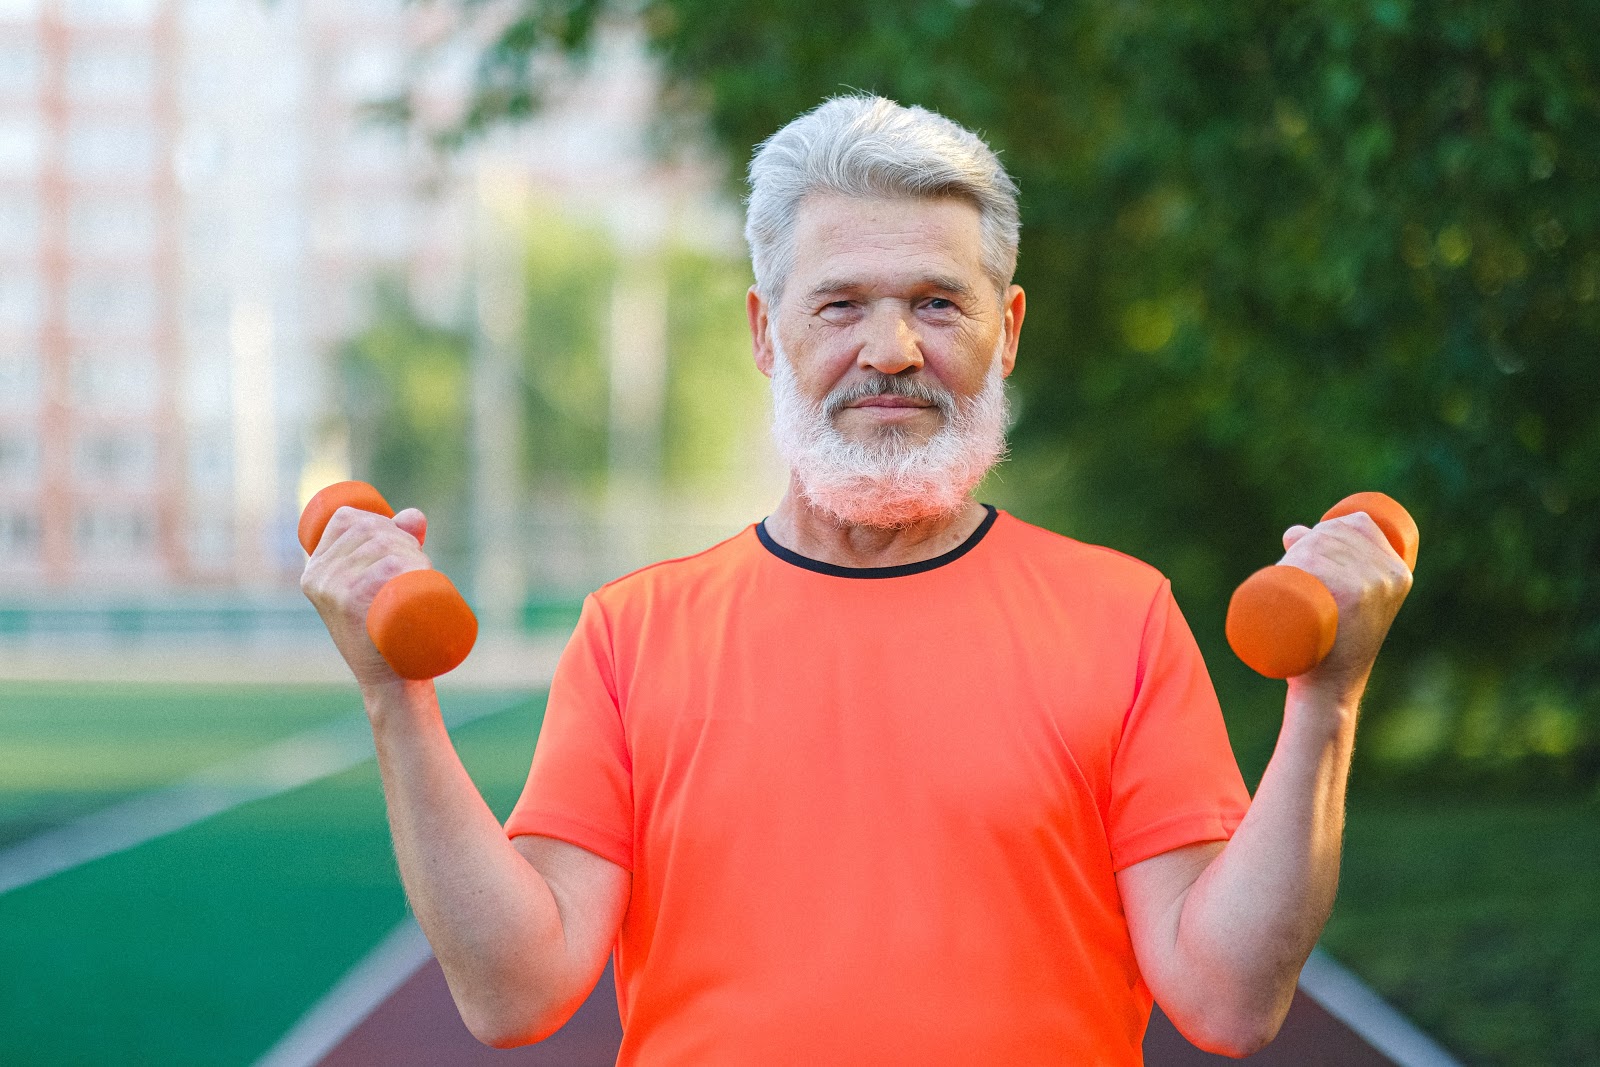 The Best 5 Exercises if You’re 65 and Older